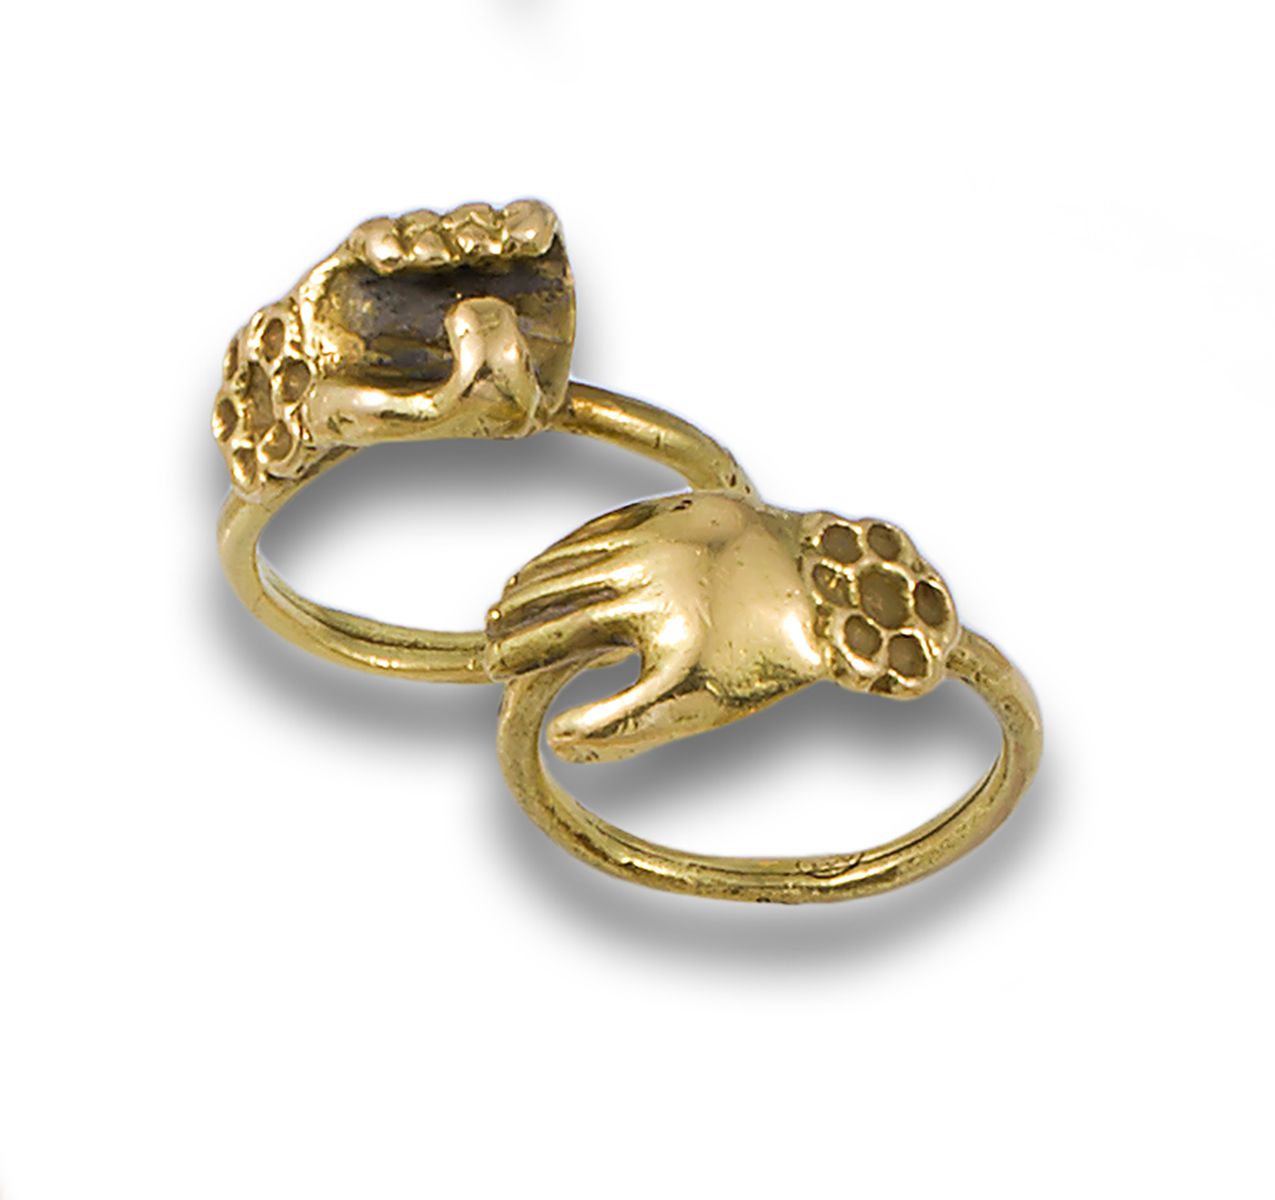 TWO YELLOW GOLD HAND RINGS Set di due anelli a mano in oro giallo 18kt ....